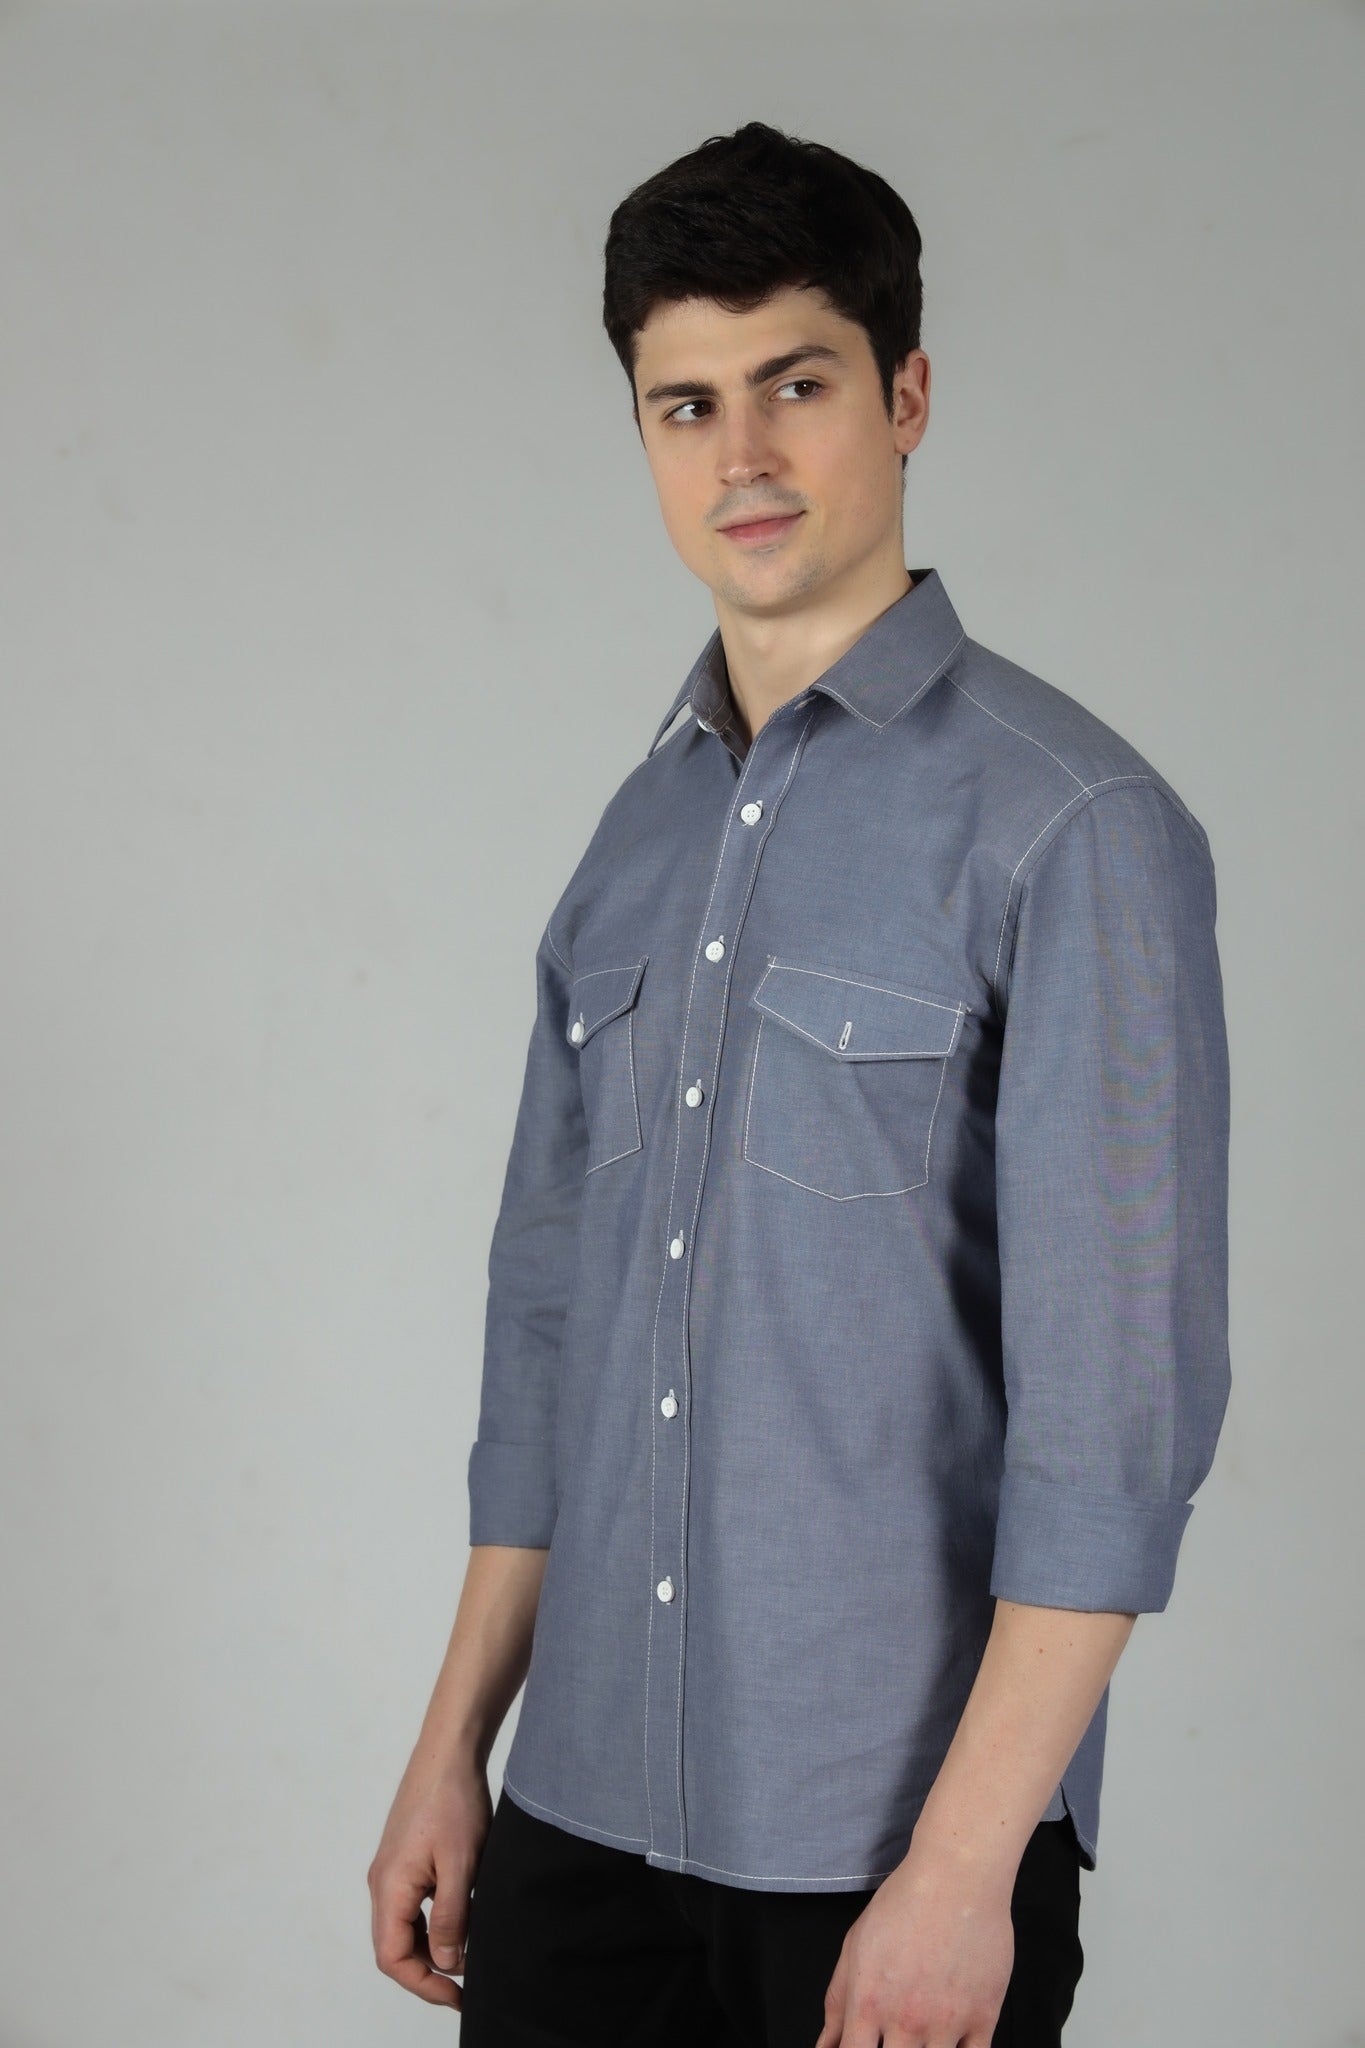 Blue Chambray Men's Shirt in Cotton with Double Pockets & Contrast Stitch